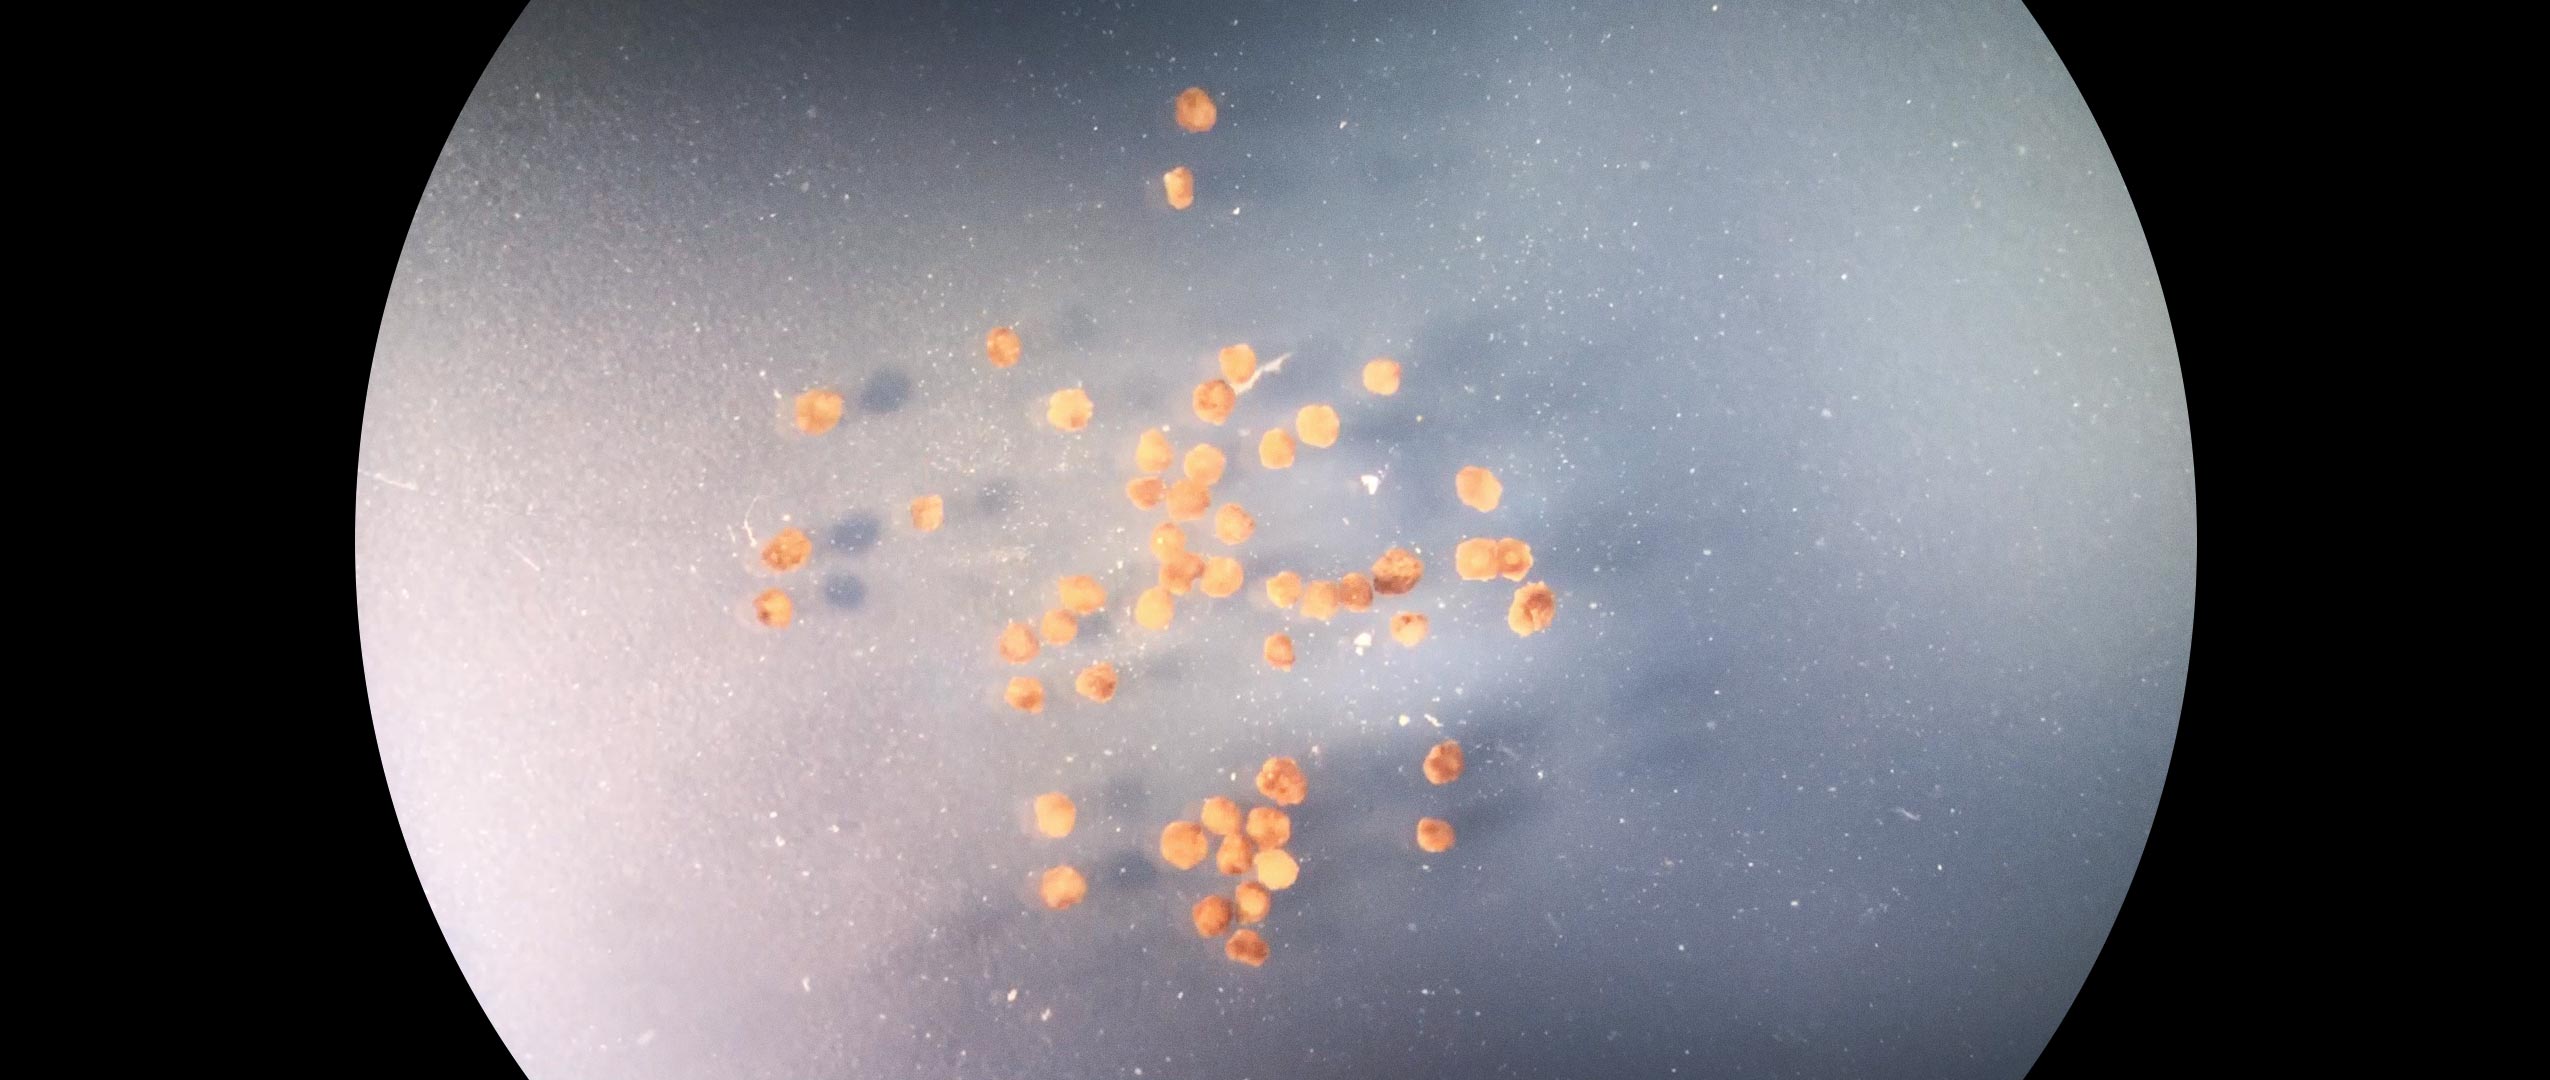 Video of xenobots swarming together in a petri dish.